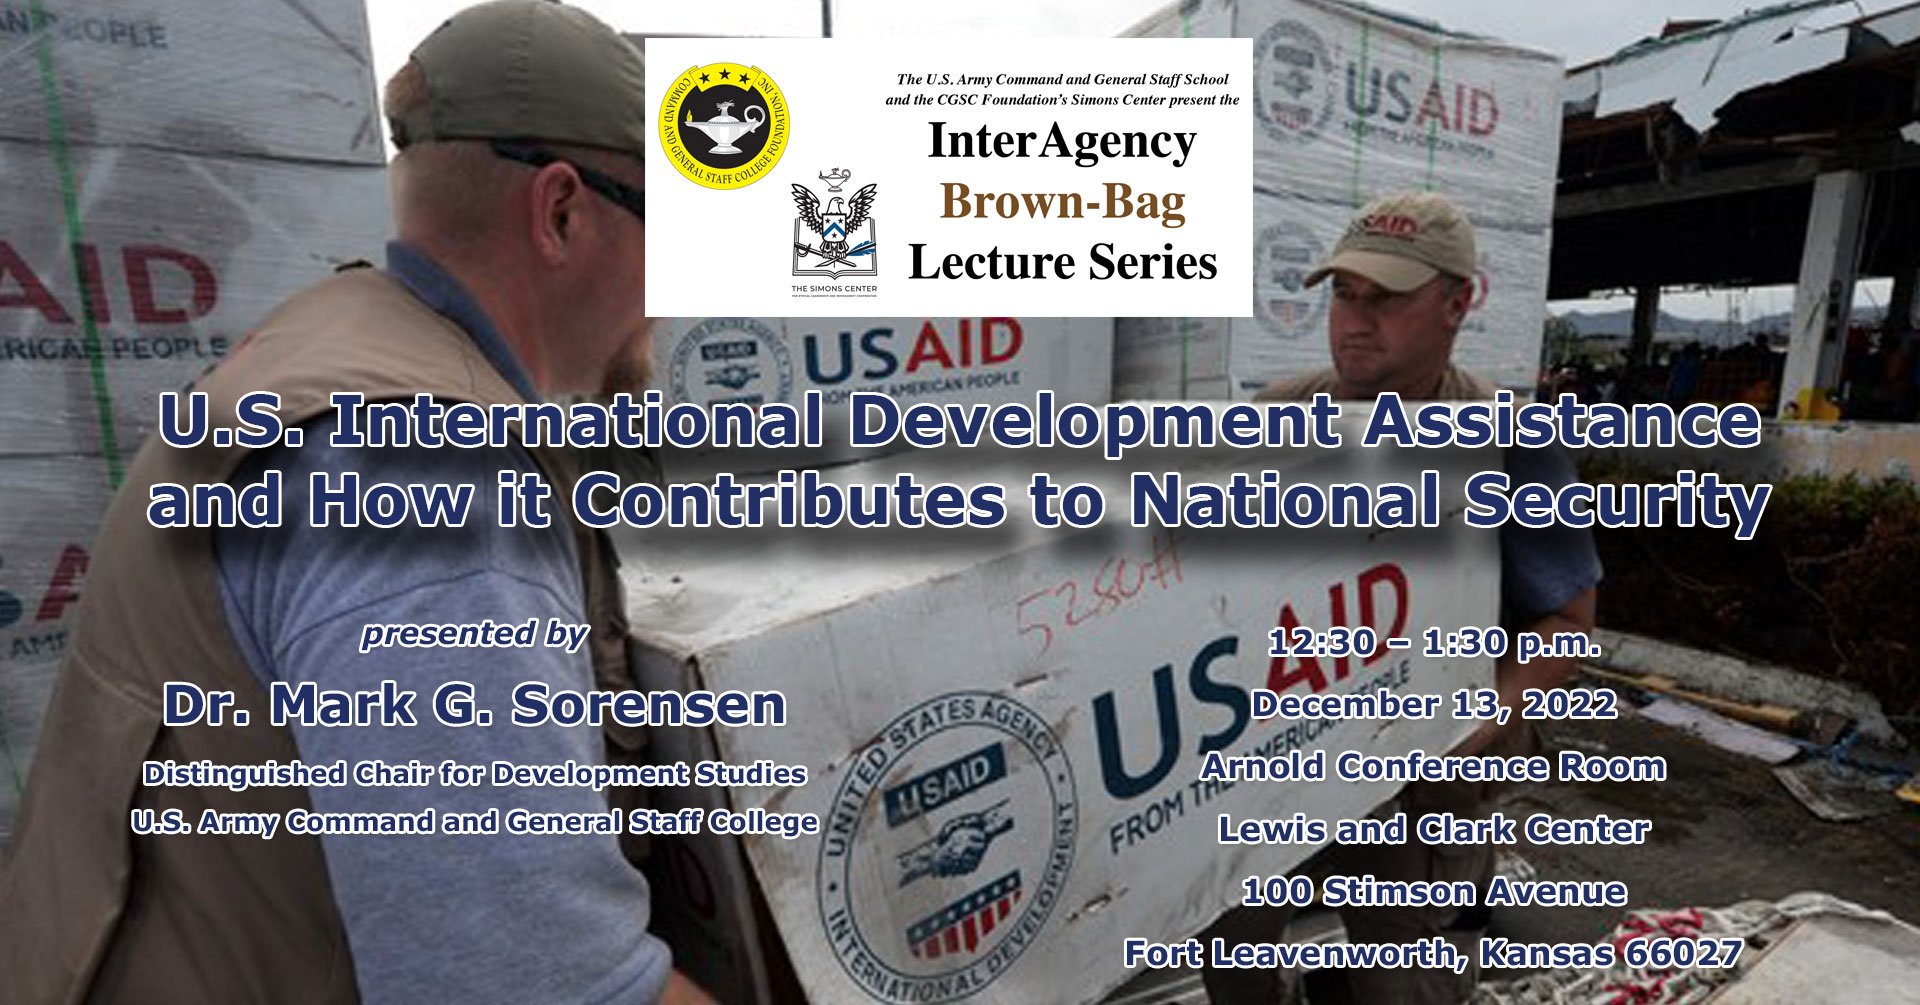 U.S. Agency for International Development (USAID) workers in the background unloading boxes of aid supplies; InterAgency Brown-Bag Lecture logo at top with subject and date of upcoming lecture in text below.